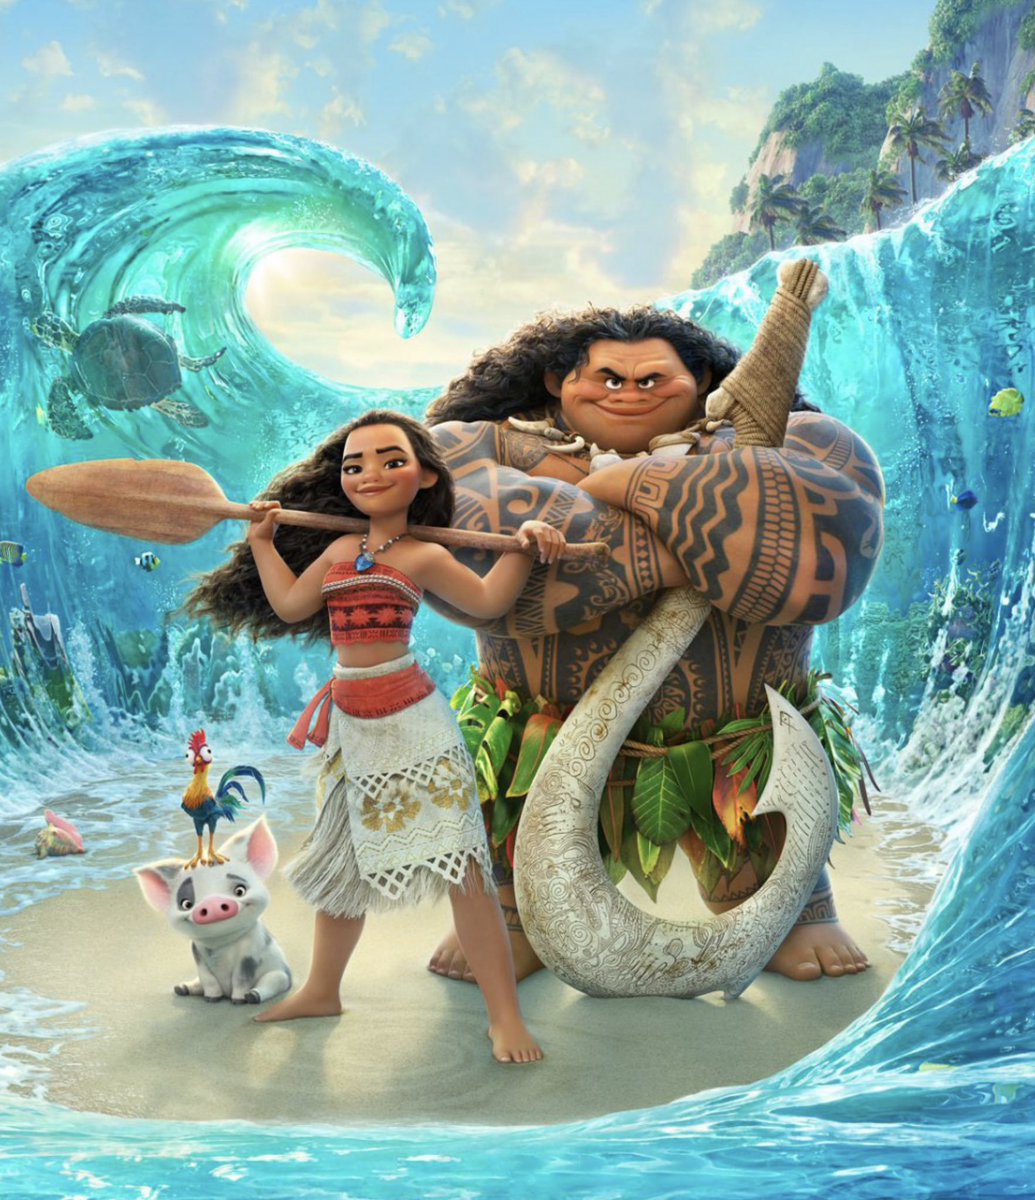 The live-action MOANA film begins filming this fall!